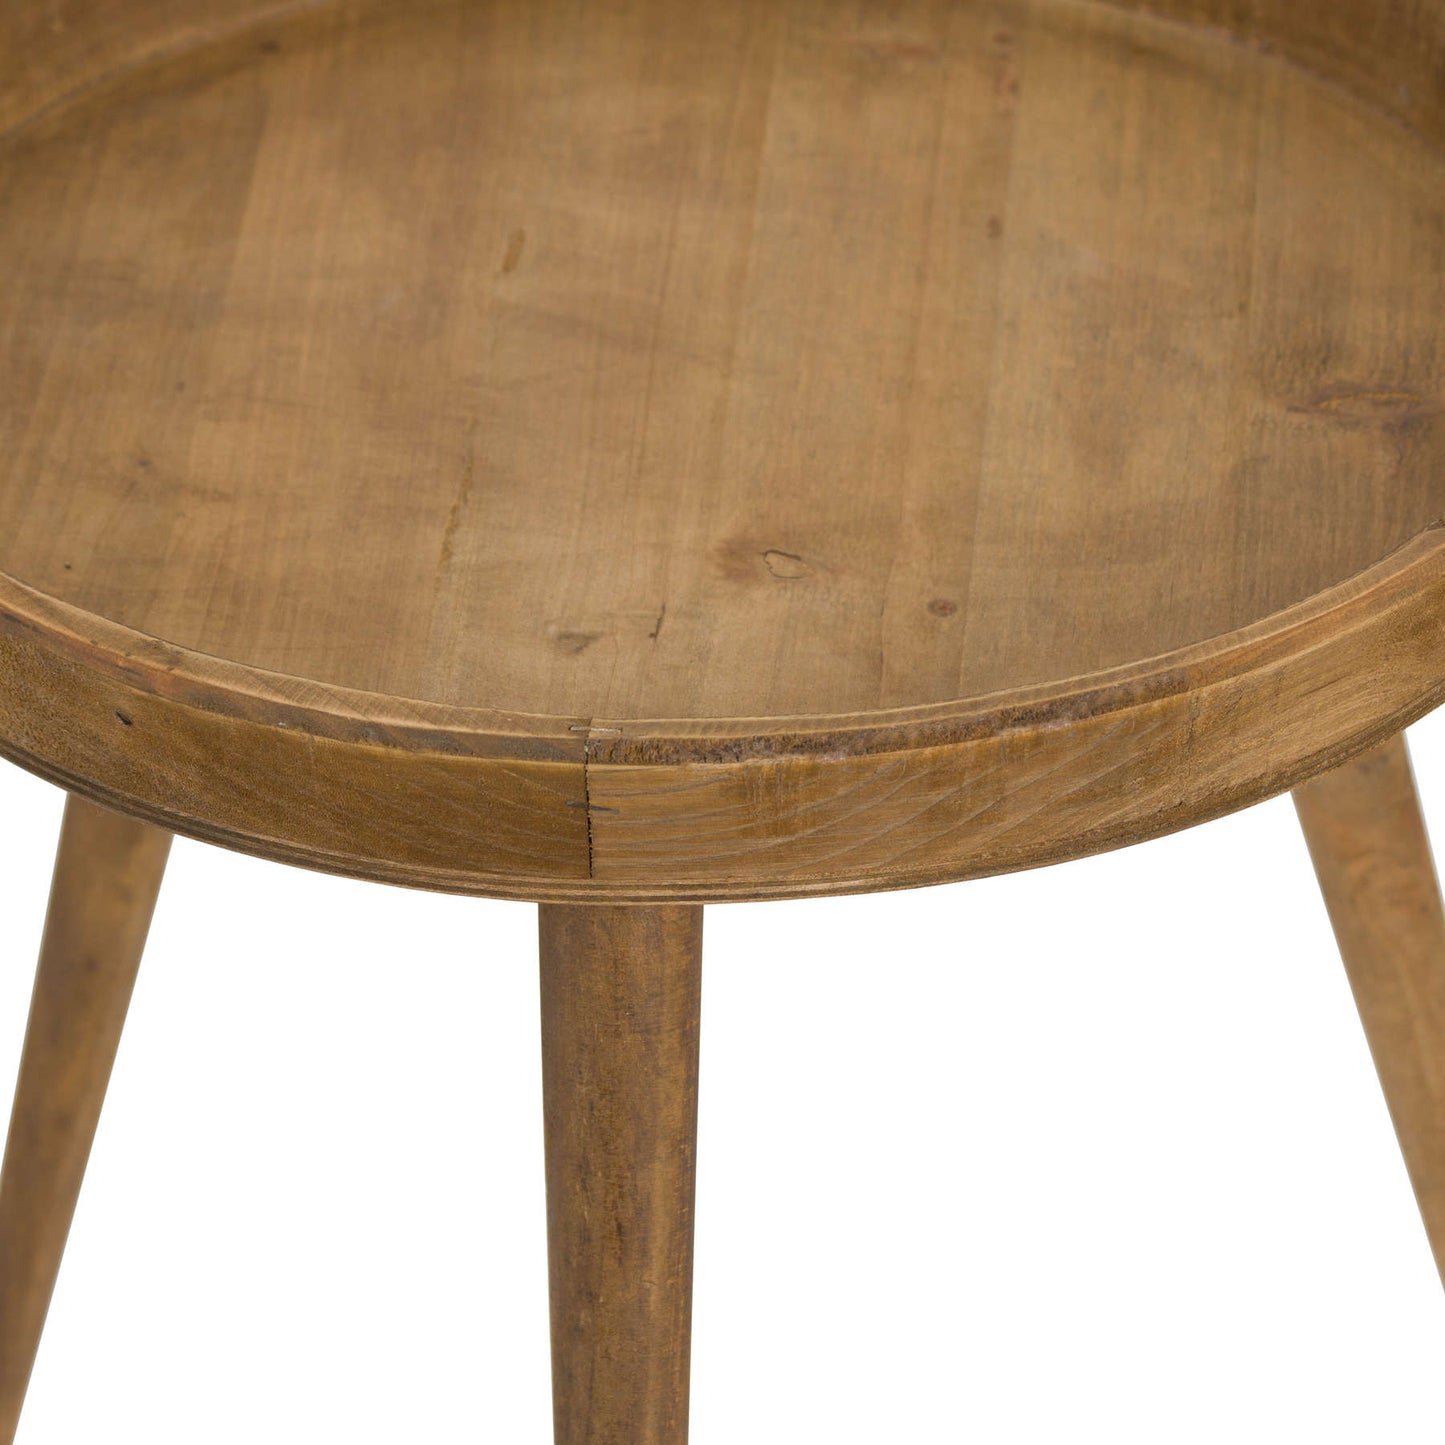 Loft Collection Set Of 3 Round Wooden Table